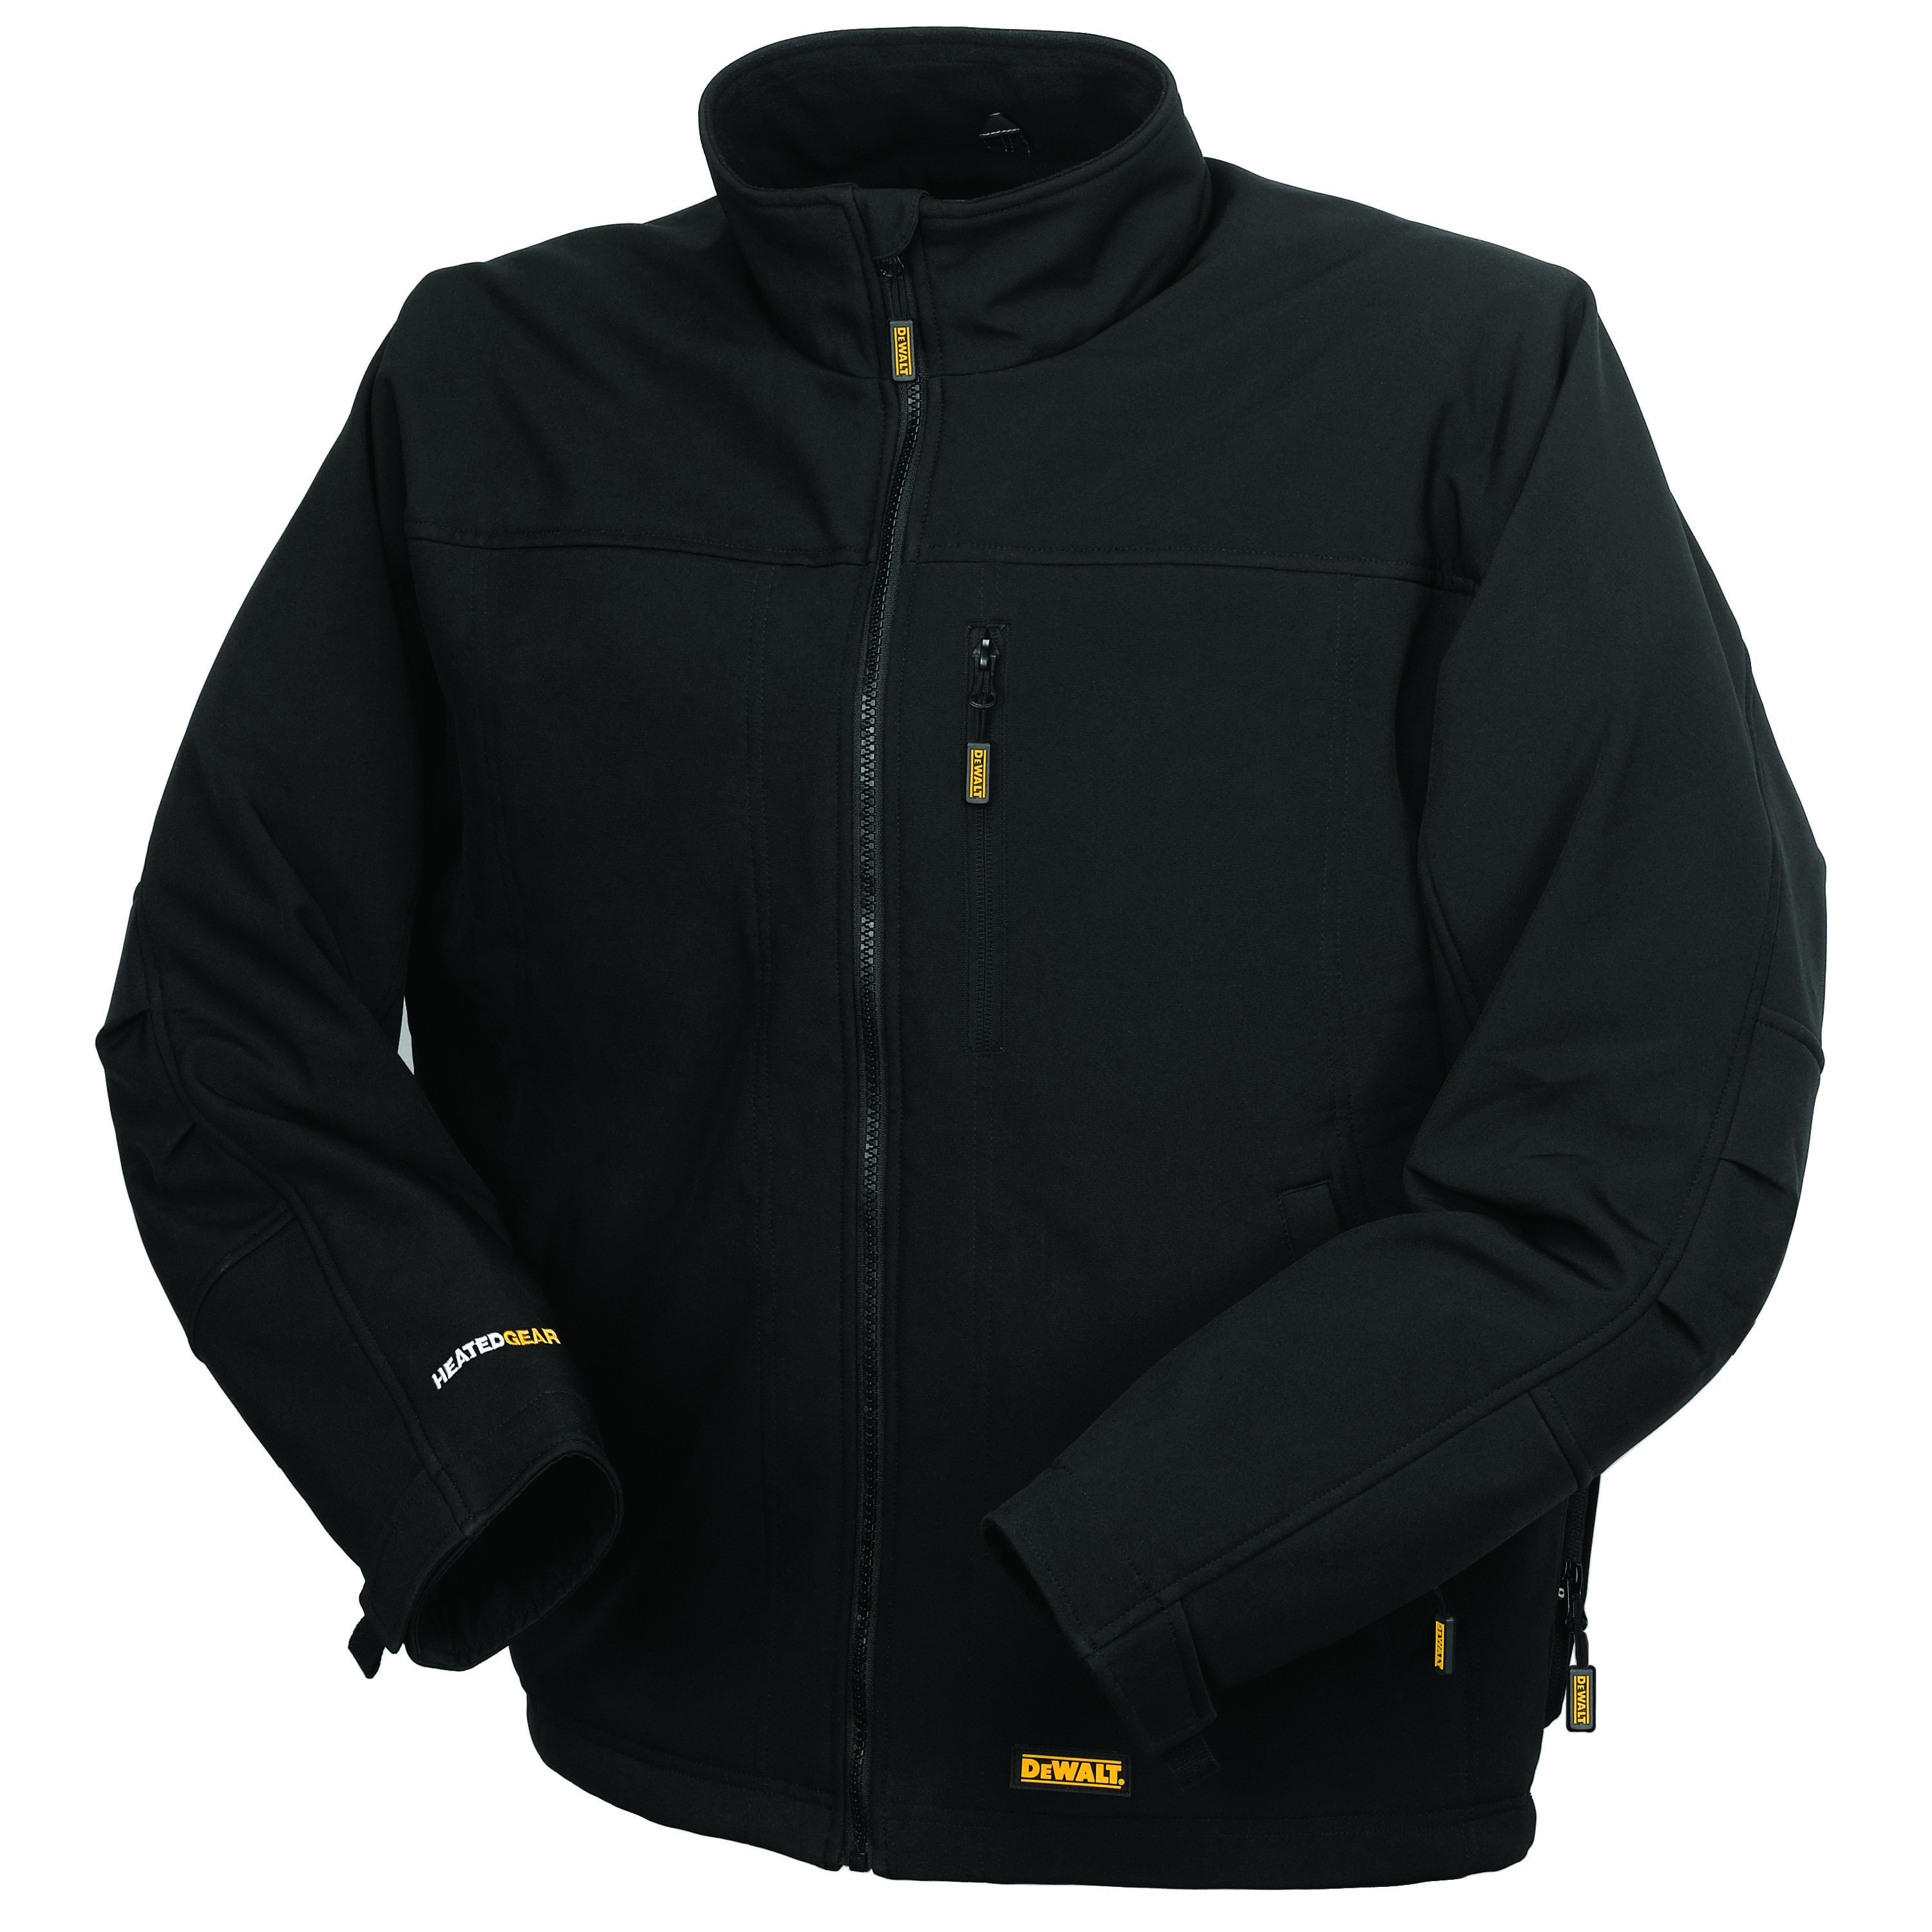 Men's Heated Soft Shell Jacket without Battery - Black - Size 2X